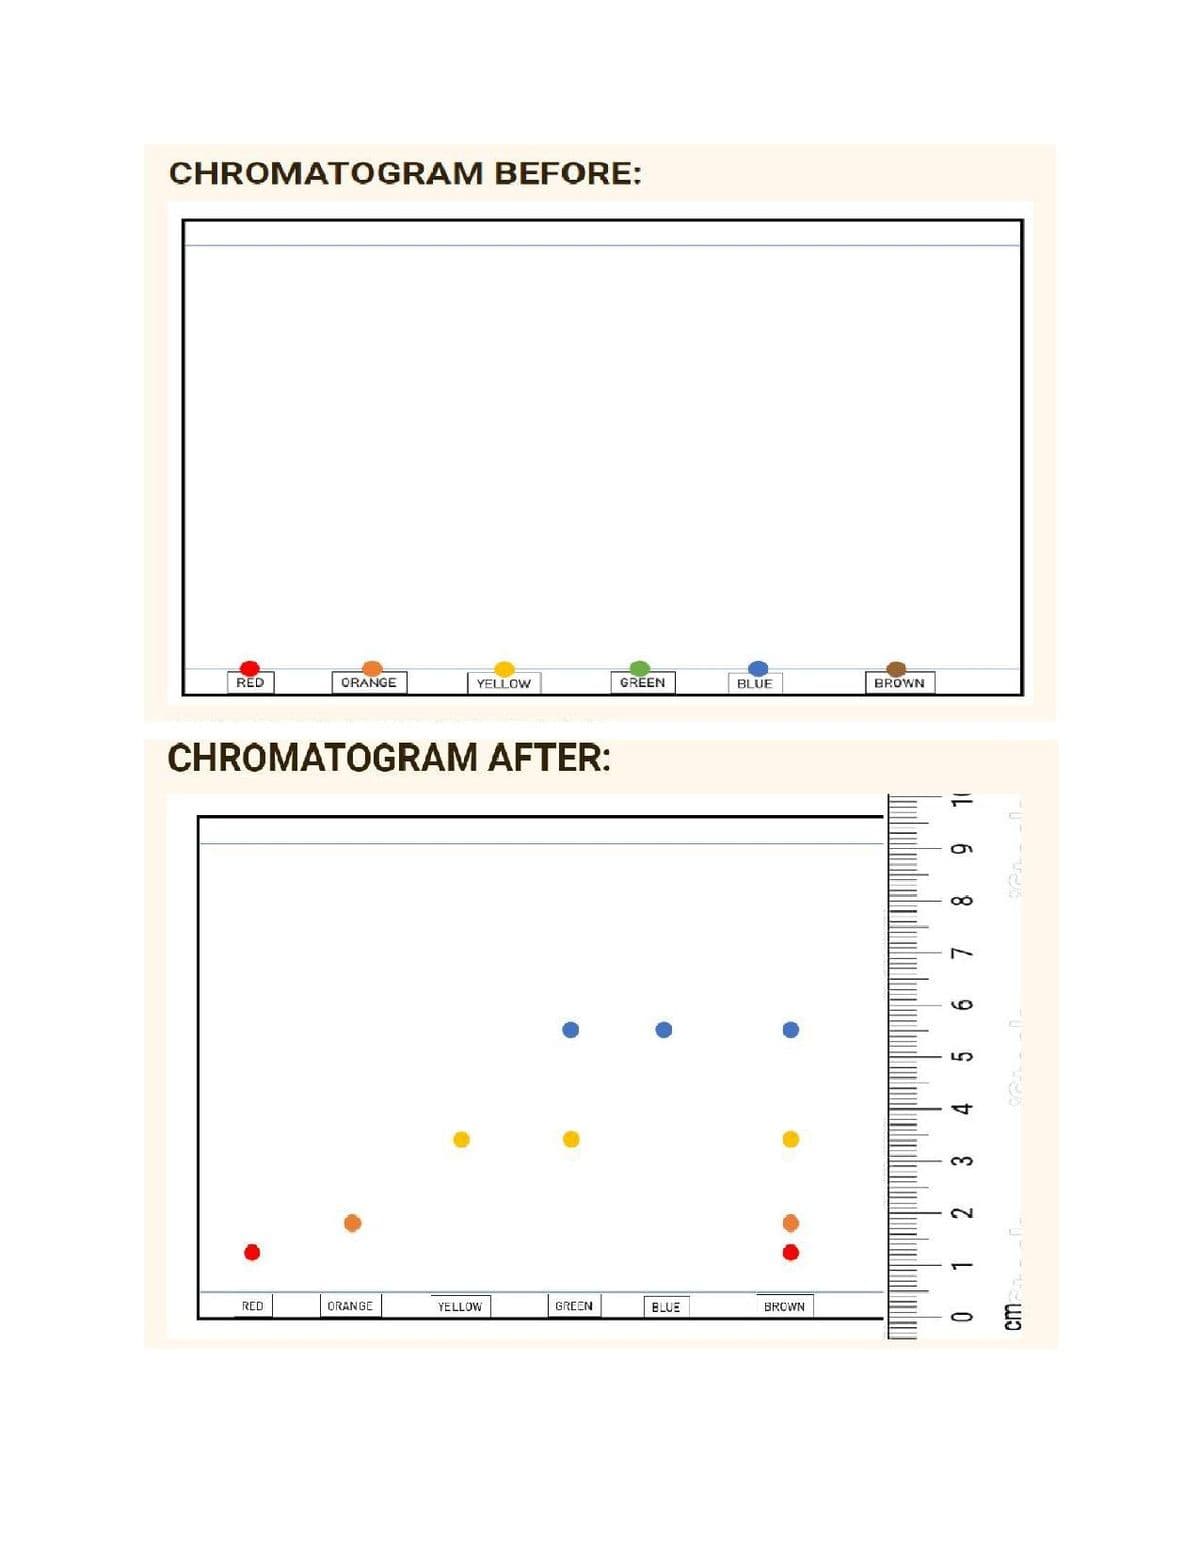 CHROMATOGRAM BEFORE:
RED
ORANGE
RED
CHROMATOGRAM AFTER:
YELLOW
ORANGE
YELLOW
GREEN
GREEN
BLUE
BLUE
BROWN
BROWN
IL 6 8 L
9
G
3
2
O
cm